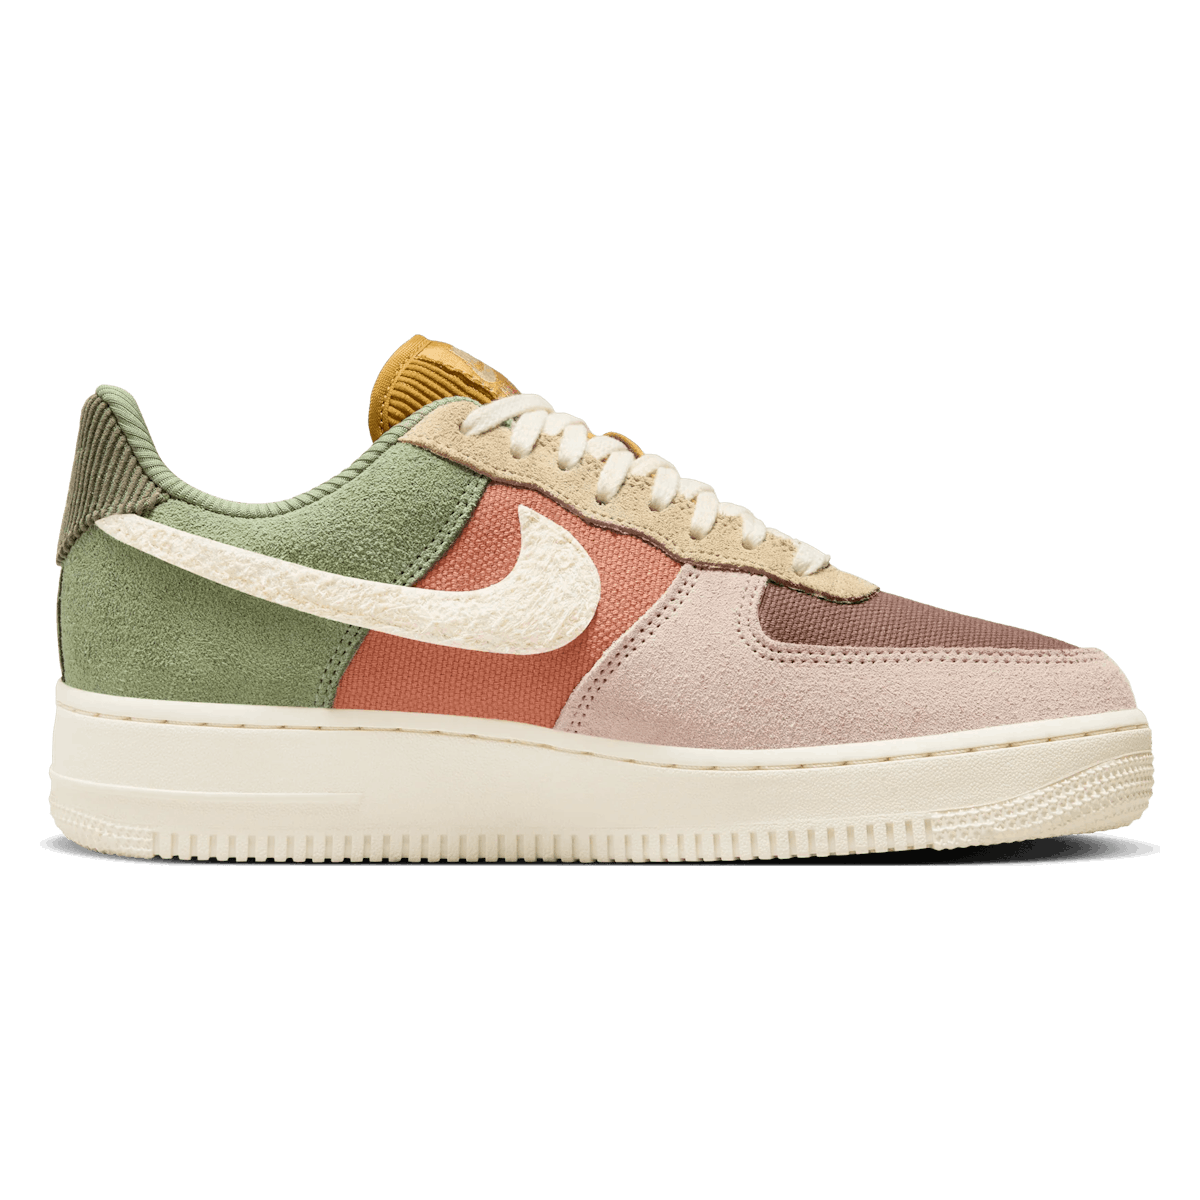 Nike Air Force 1 Lx Wmns "Oil Green Pale Ivory"